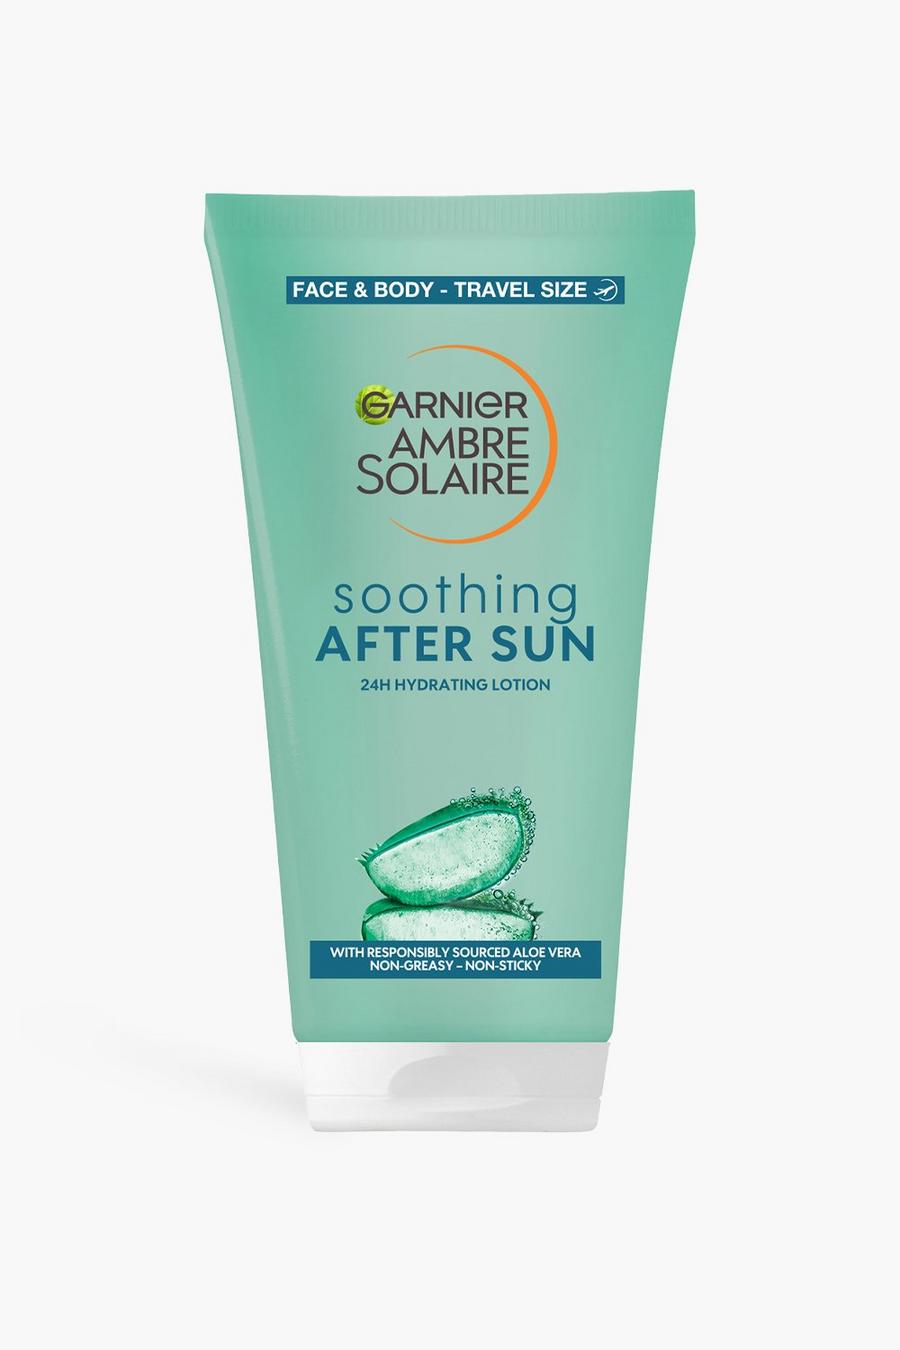 White vit Garnier Ambre Solaire Hydrating Soothing After Sun Lotion Travel size 100ml (SAVE 17%)